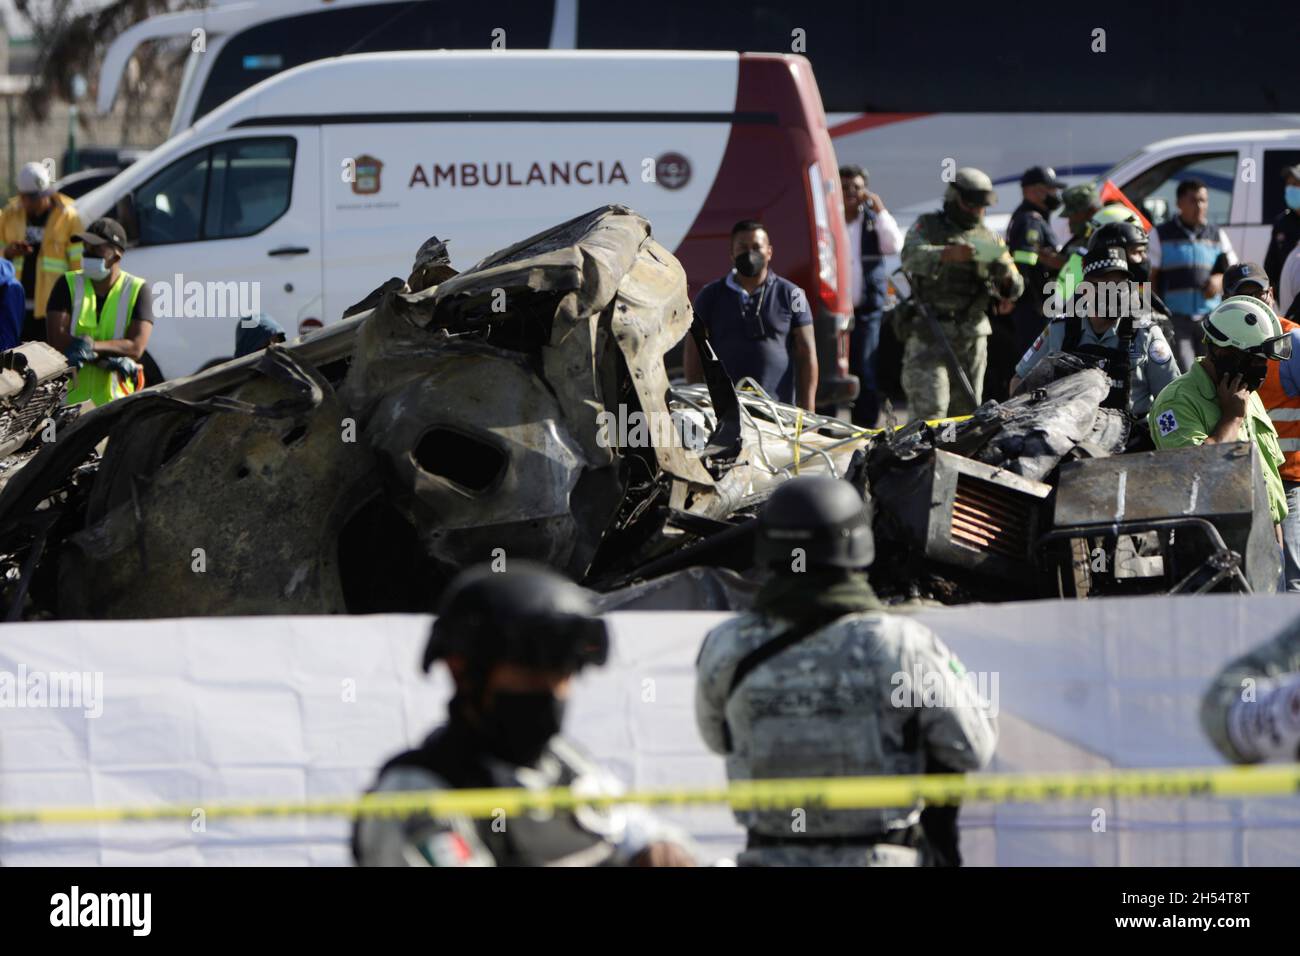 Emergency services personnel work the scene of a deadly accident involving a tractor-trailer on a tollway between Mexico City and Puebla, in Chalco, Mexico November 6, 2021. REUTERS/Luis Cortes Stock Photo